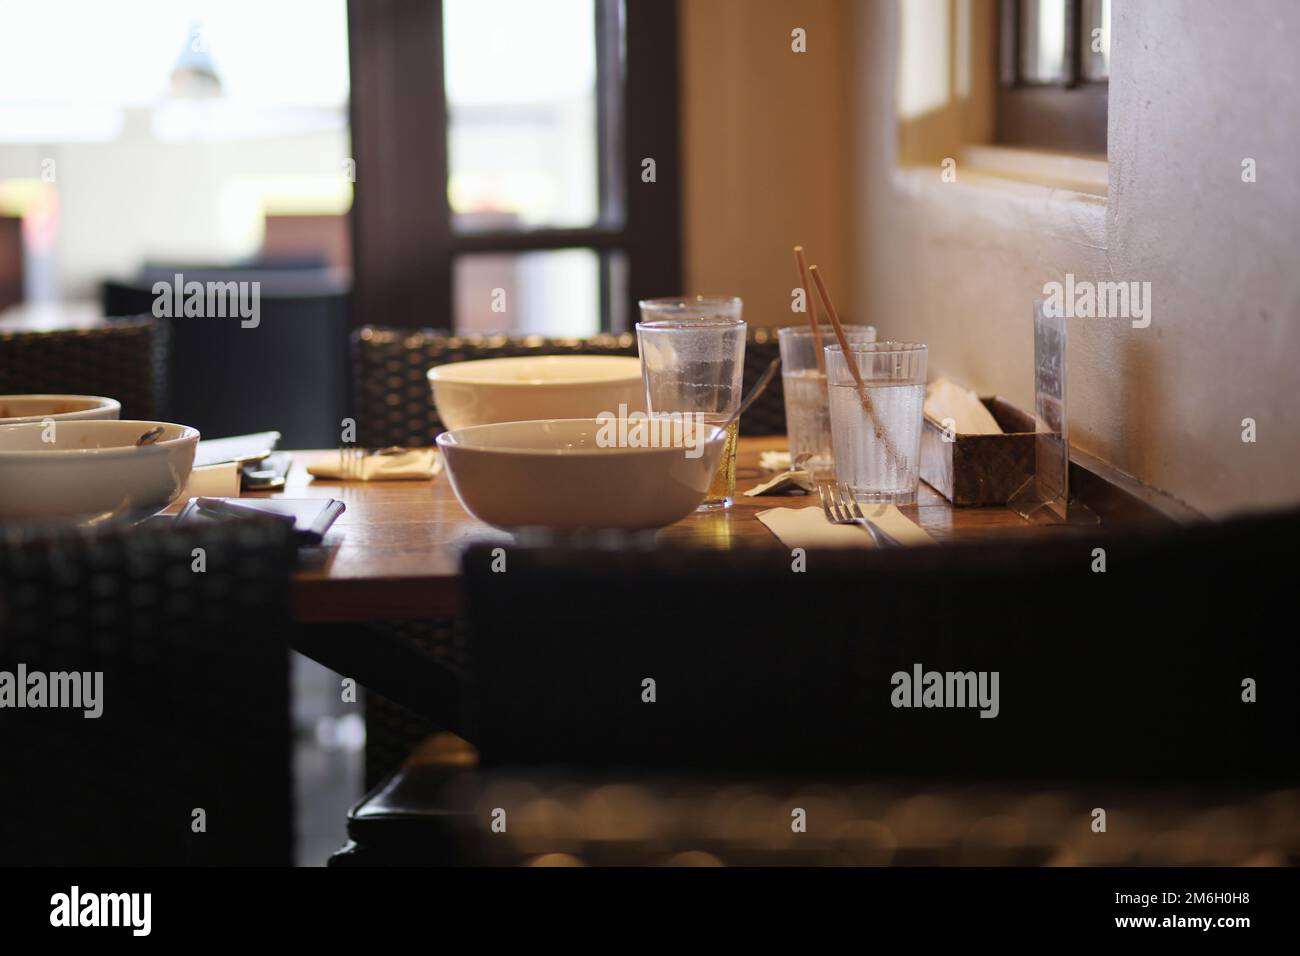 Restaurant tables with dirty dishes left in natural light Stock Photo